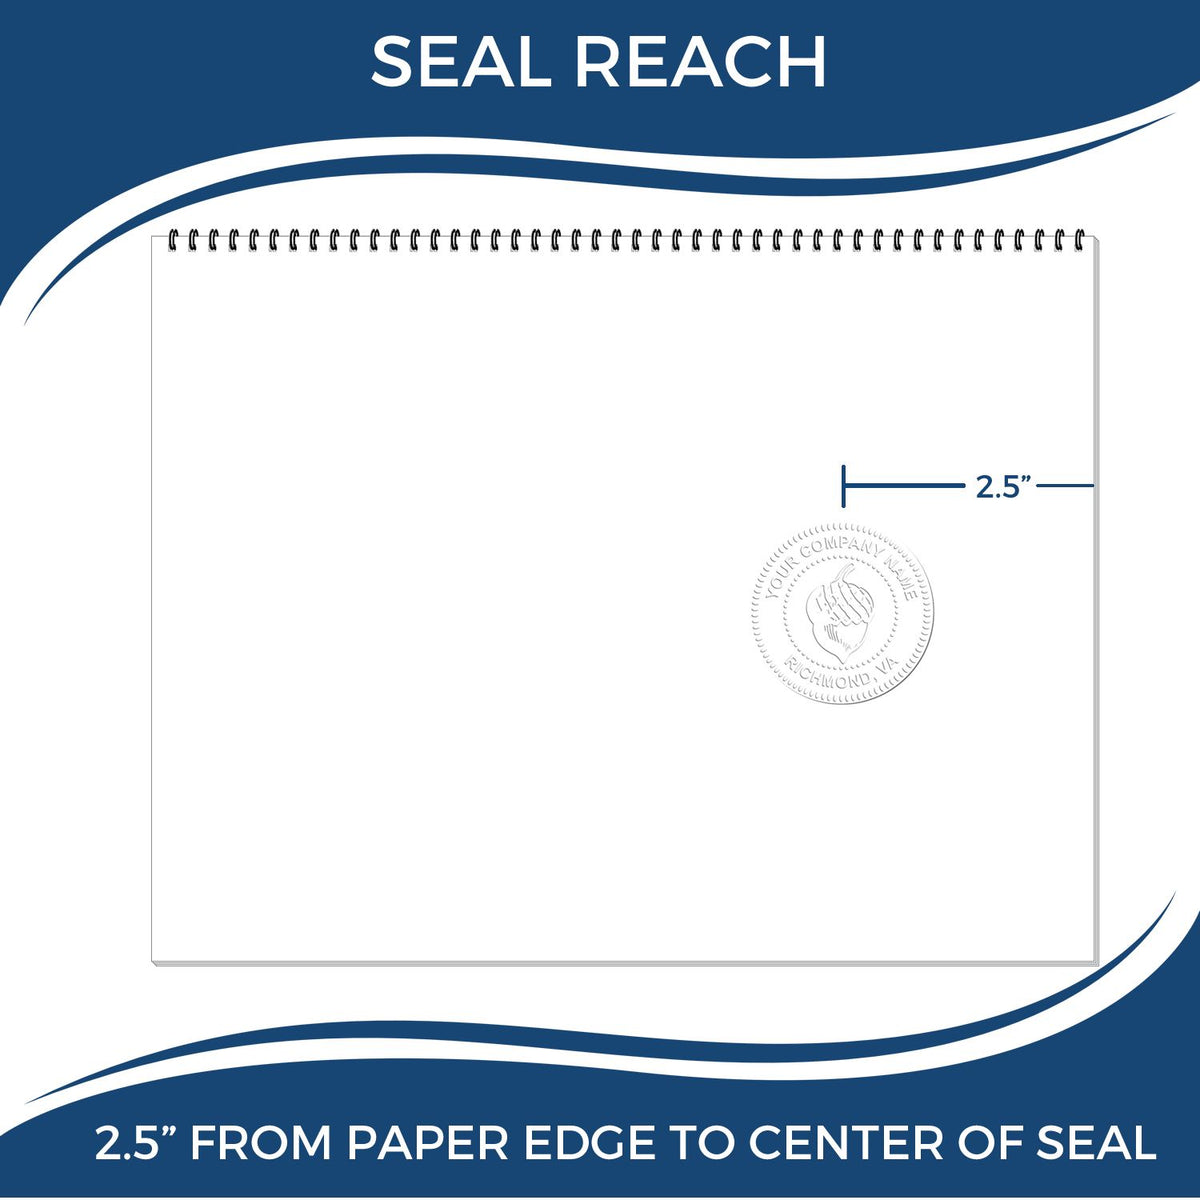 An infographic showing the seal reach which is represented by a ruler and a miniature seal image of the Heavy Duty Cast Iron Montana Engineer Seal Embosser